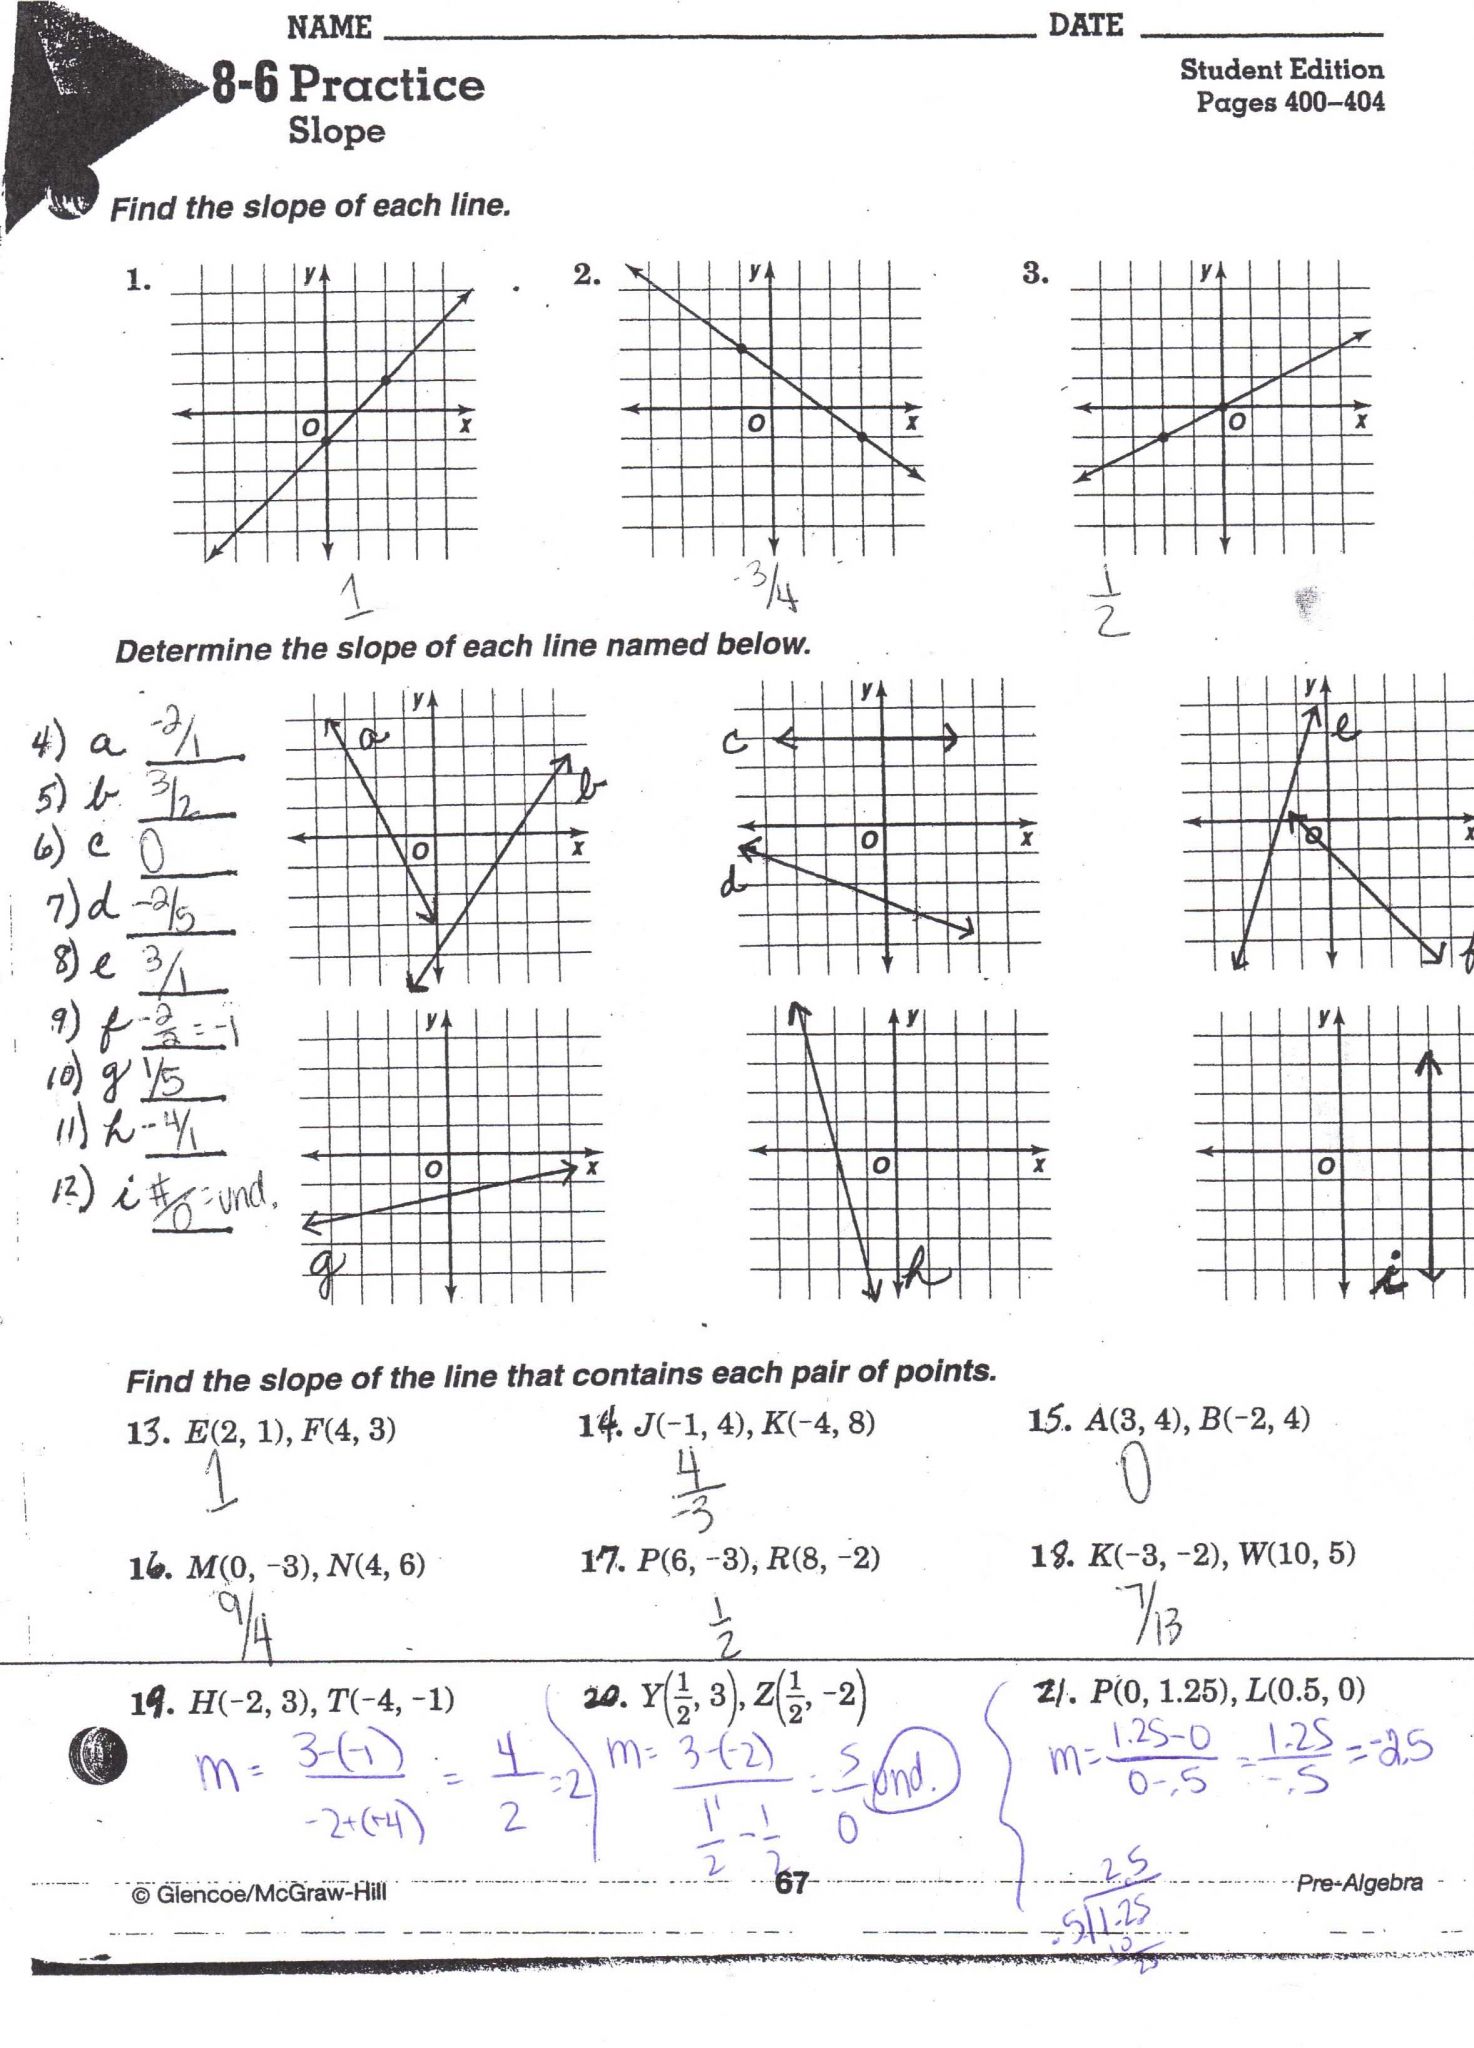 Similar Figures Worksheet Answer Key Along with Can I Pay someone to Do My Essay We Write Best Essay and Glencoe